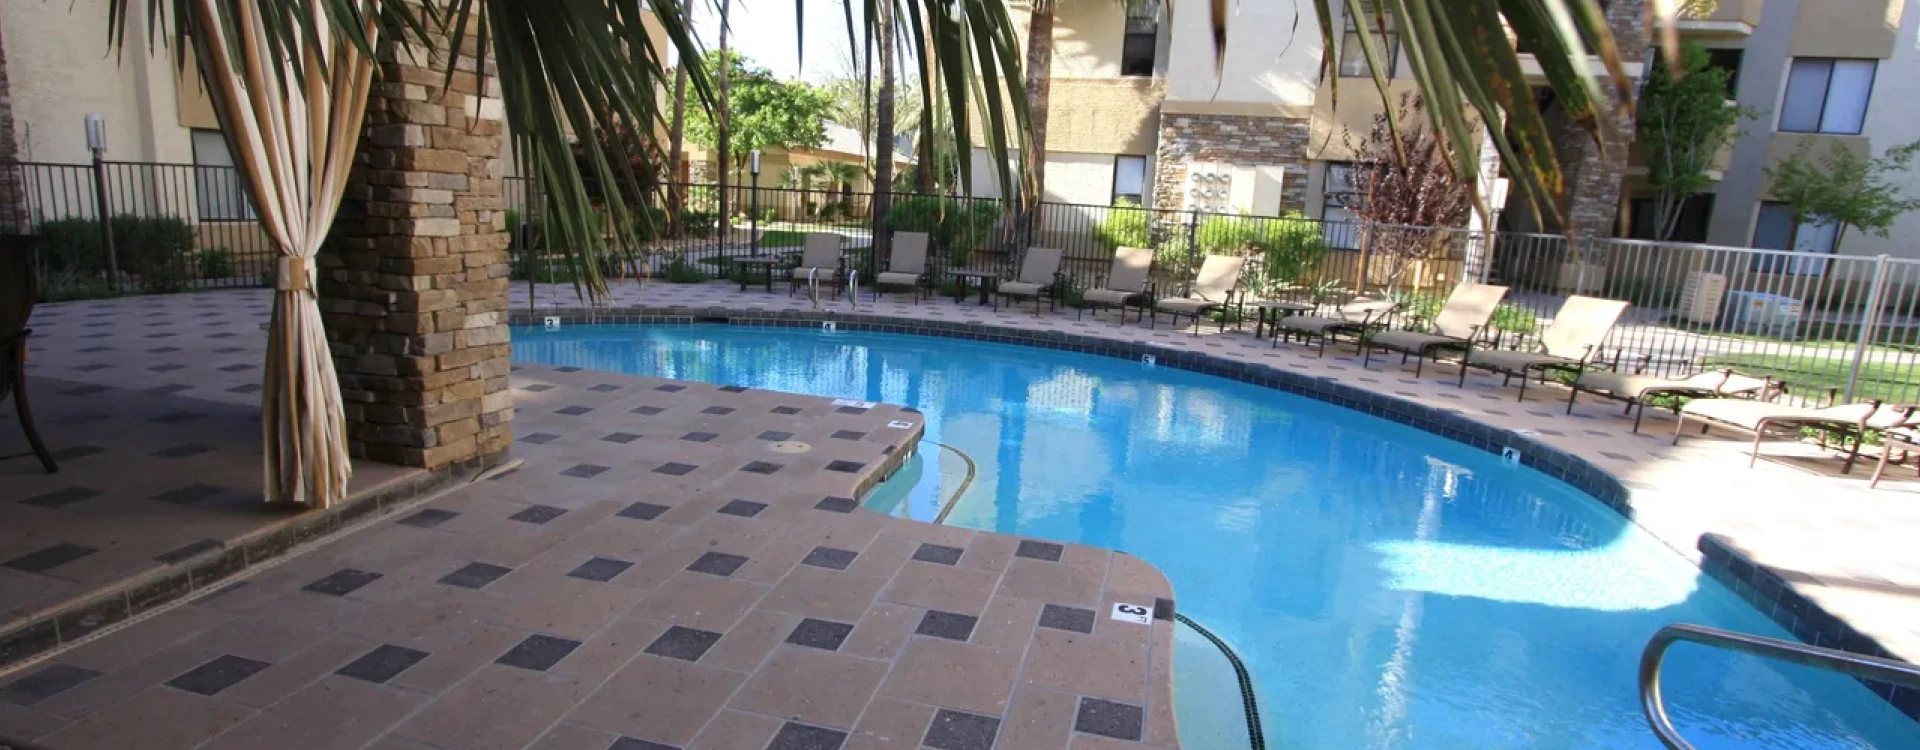 pool with tiled brownish floor